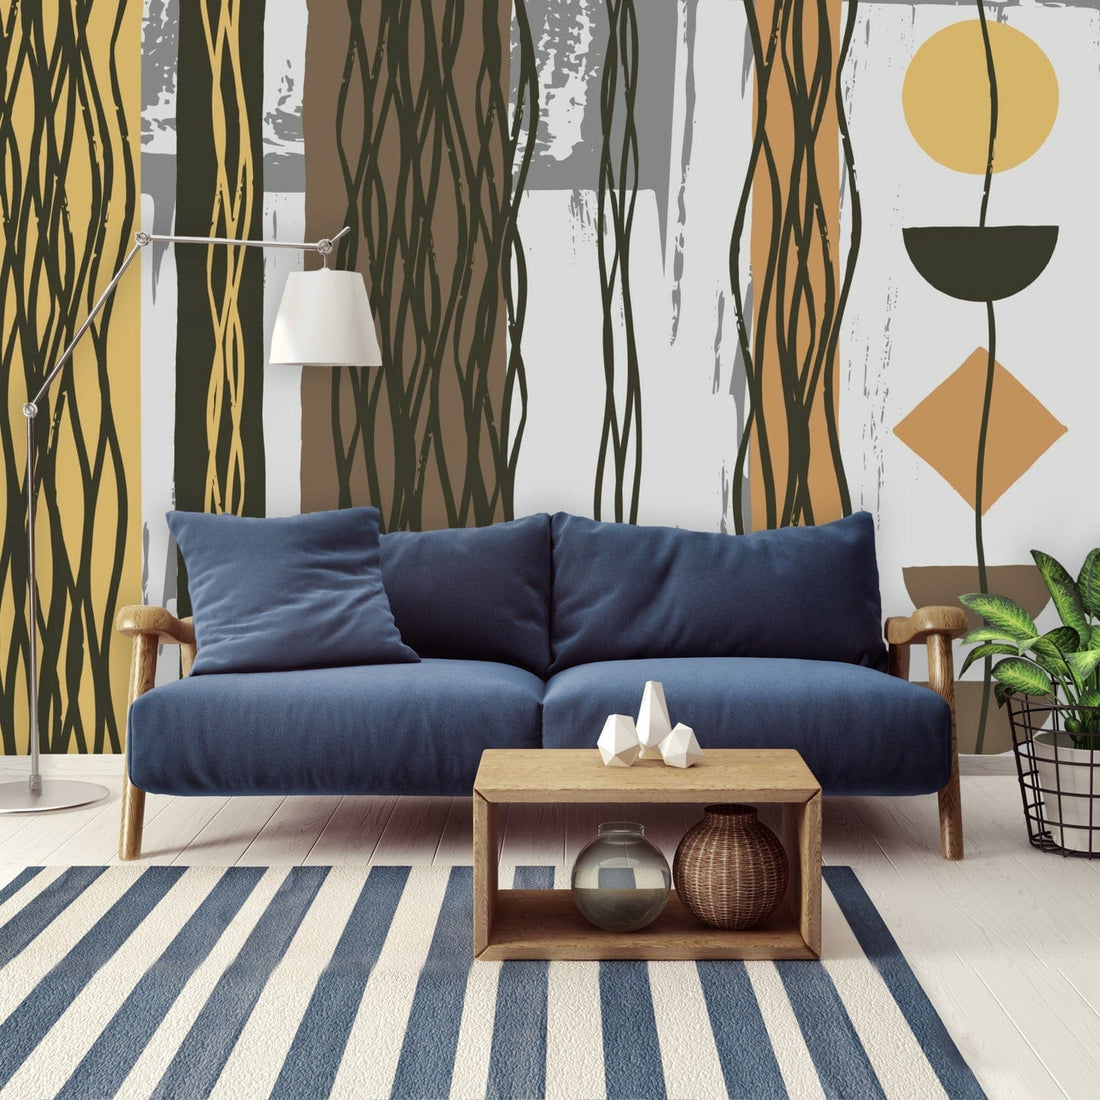 Mid Century Modern Boho Abstract, Retro Brown, Yellow, White, Gray Peel And Stick Wall Murals Wallpaper H96 x W140